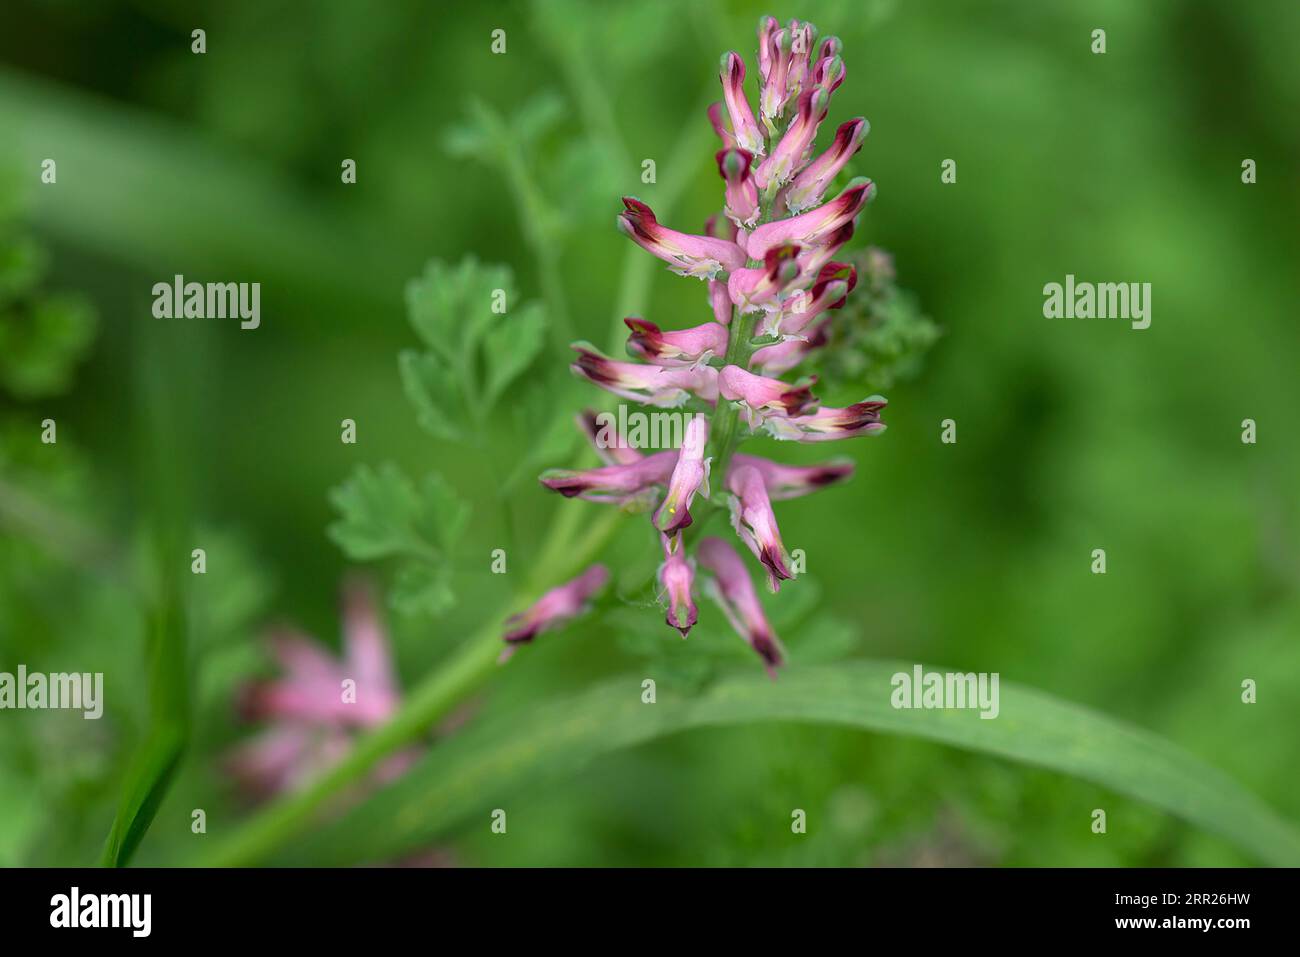 Flower of common fumitory (Fumaria officinalis), Bavaria, Germany Stock Photo